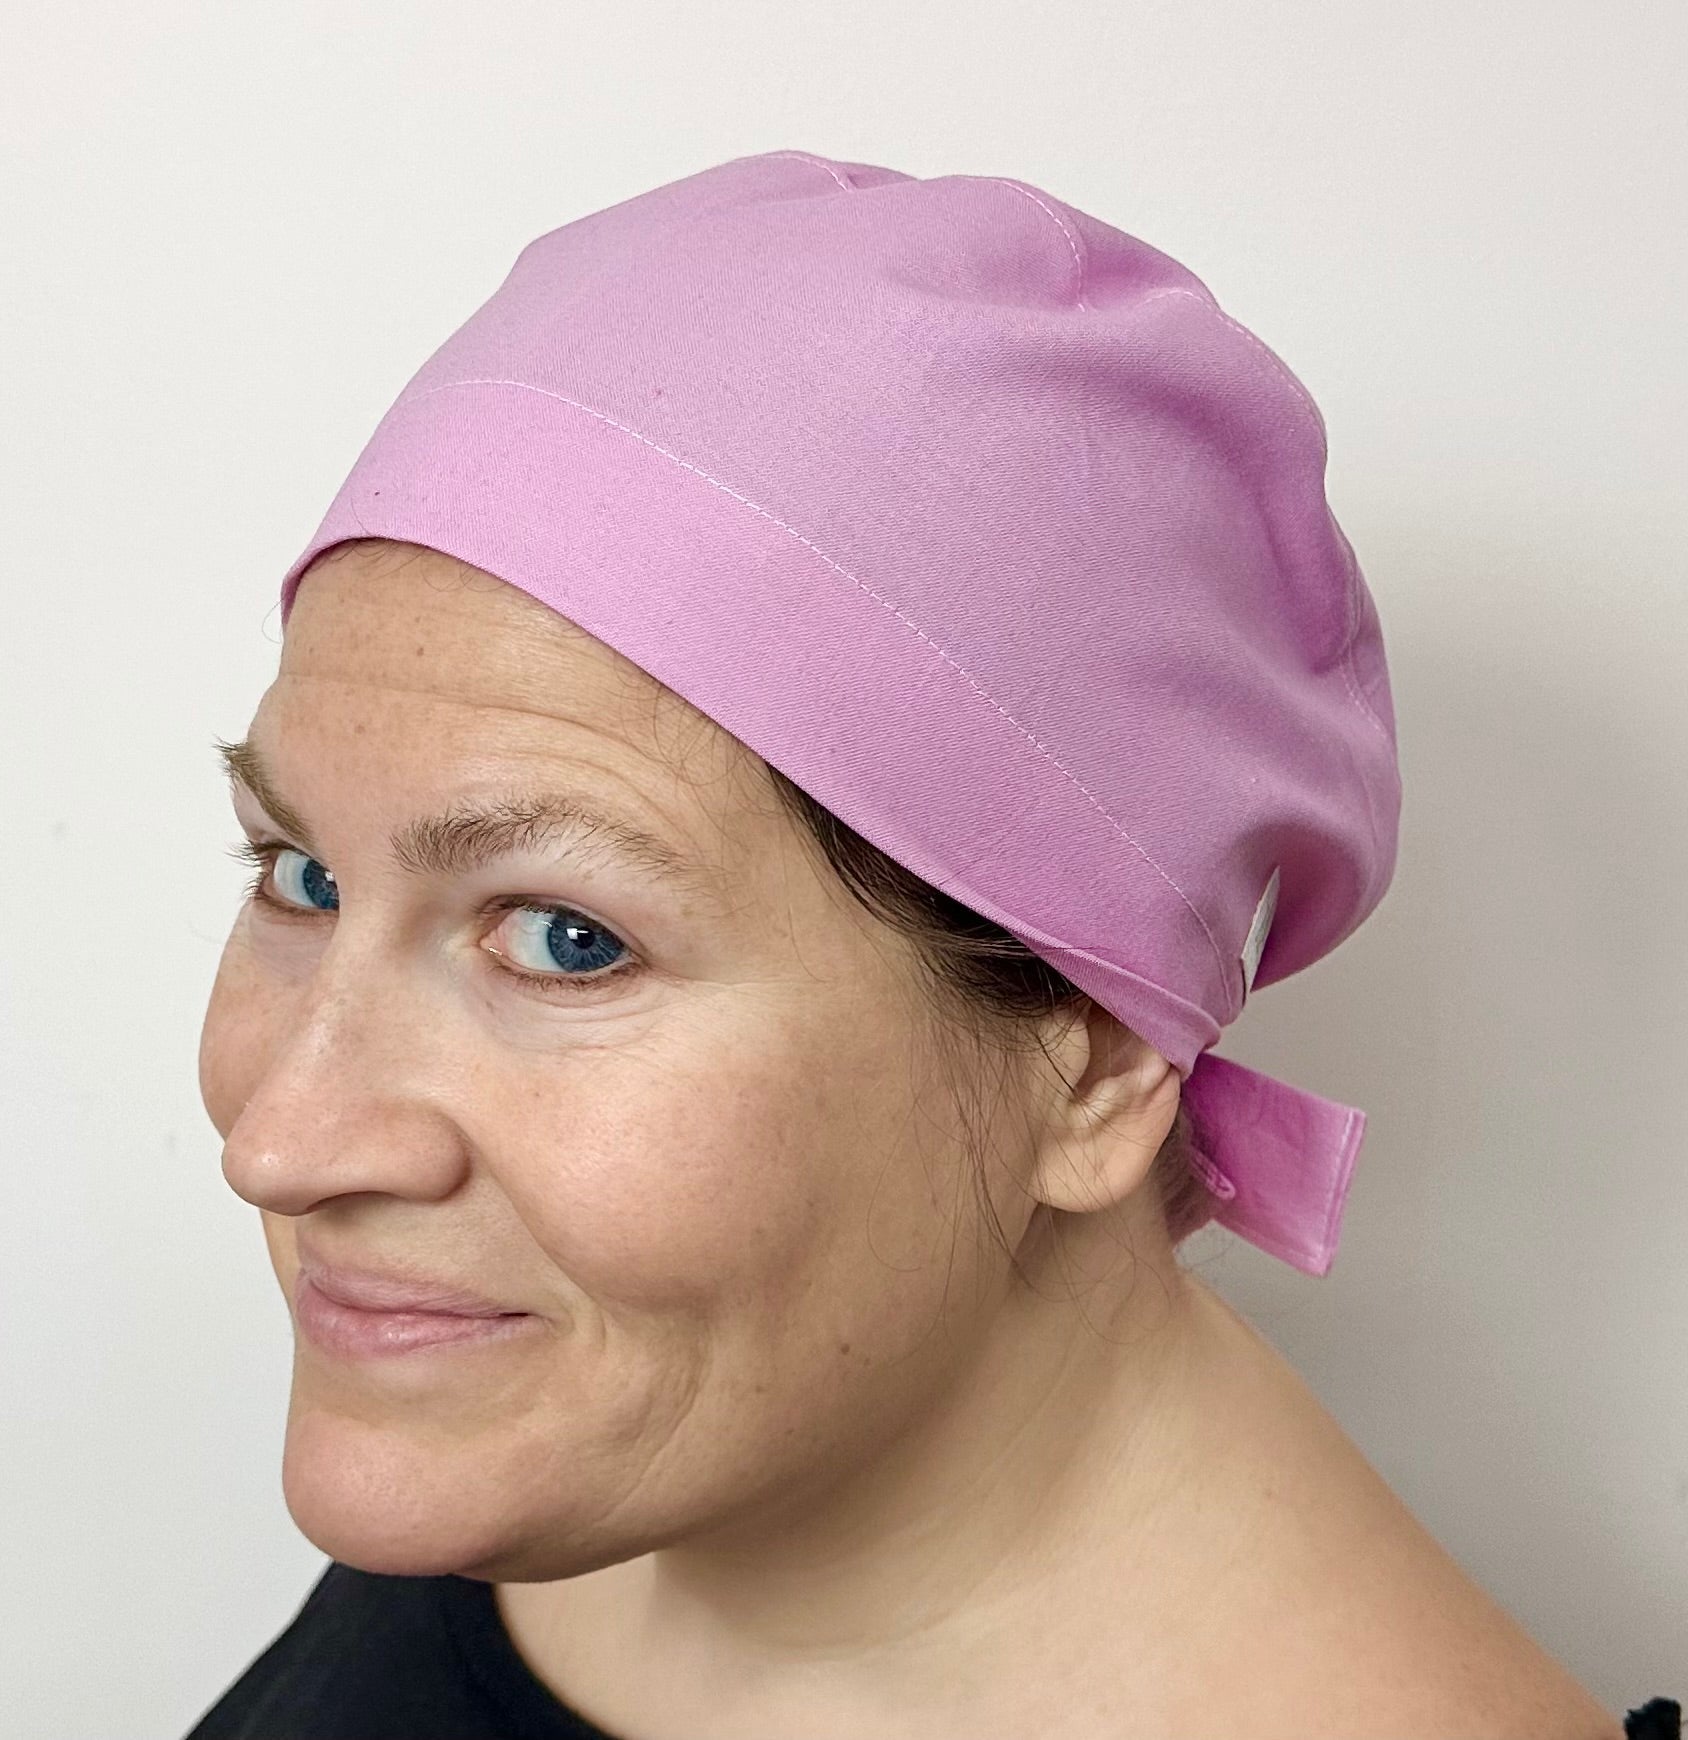 Clever Creatures Scrub Cap Tie Back or Bouffant Style